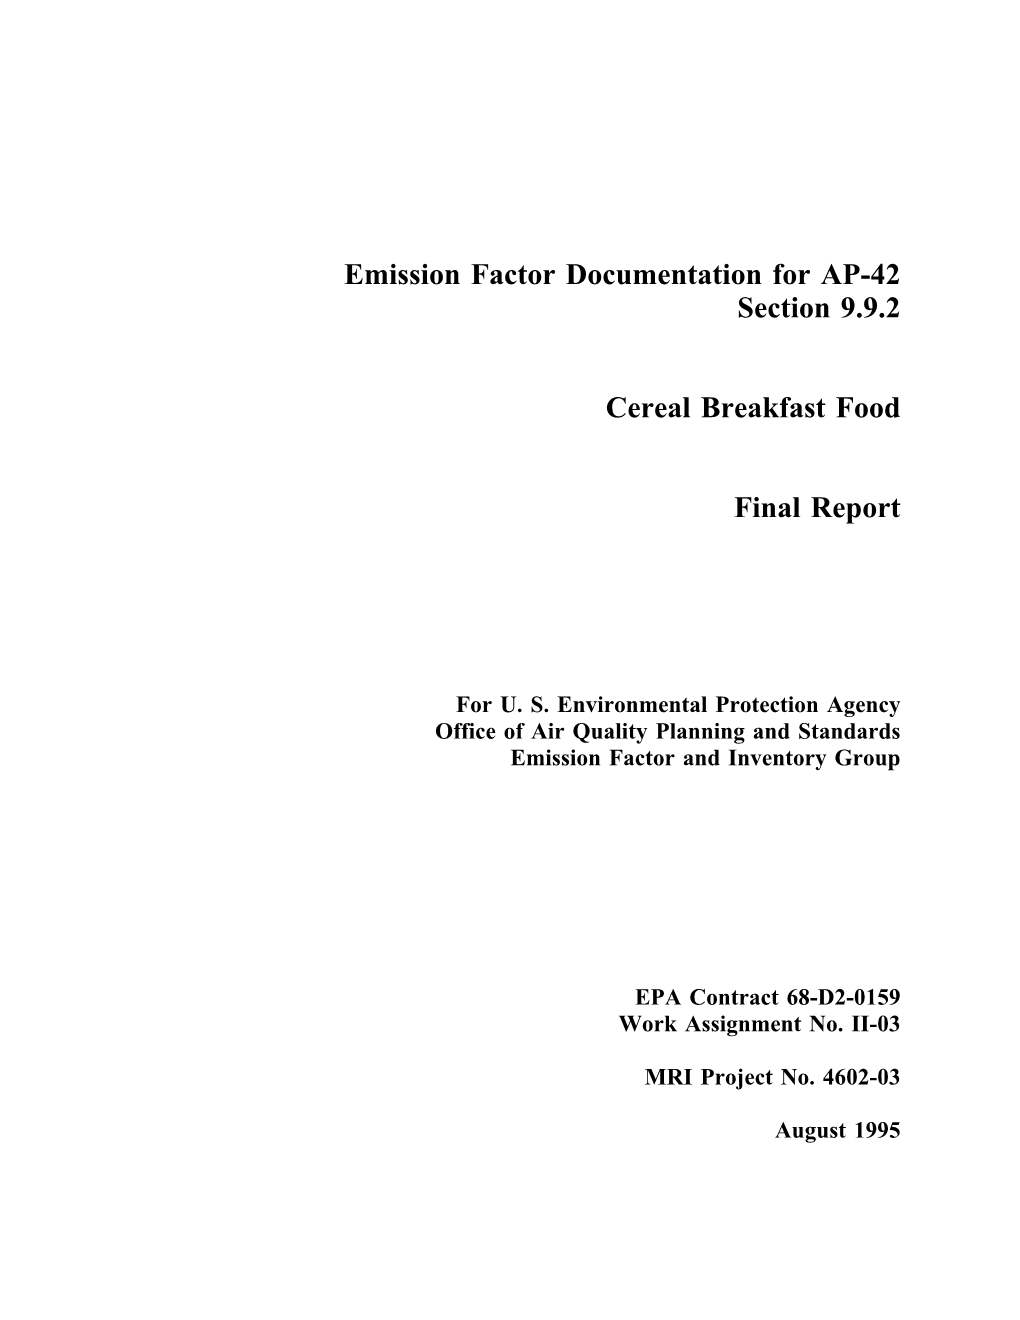 Background Report, AP-42, Vol. I, Section 9.9.2 Cereal Breakfast Food